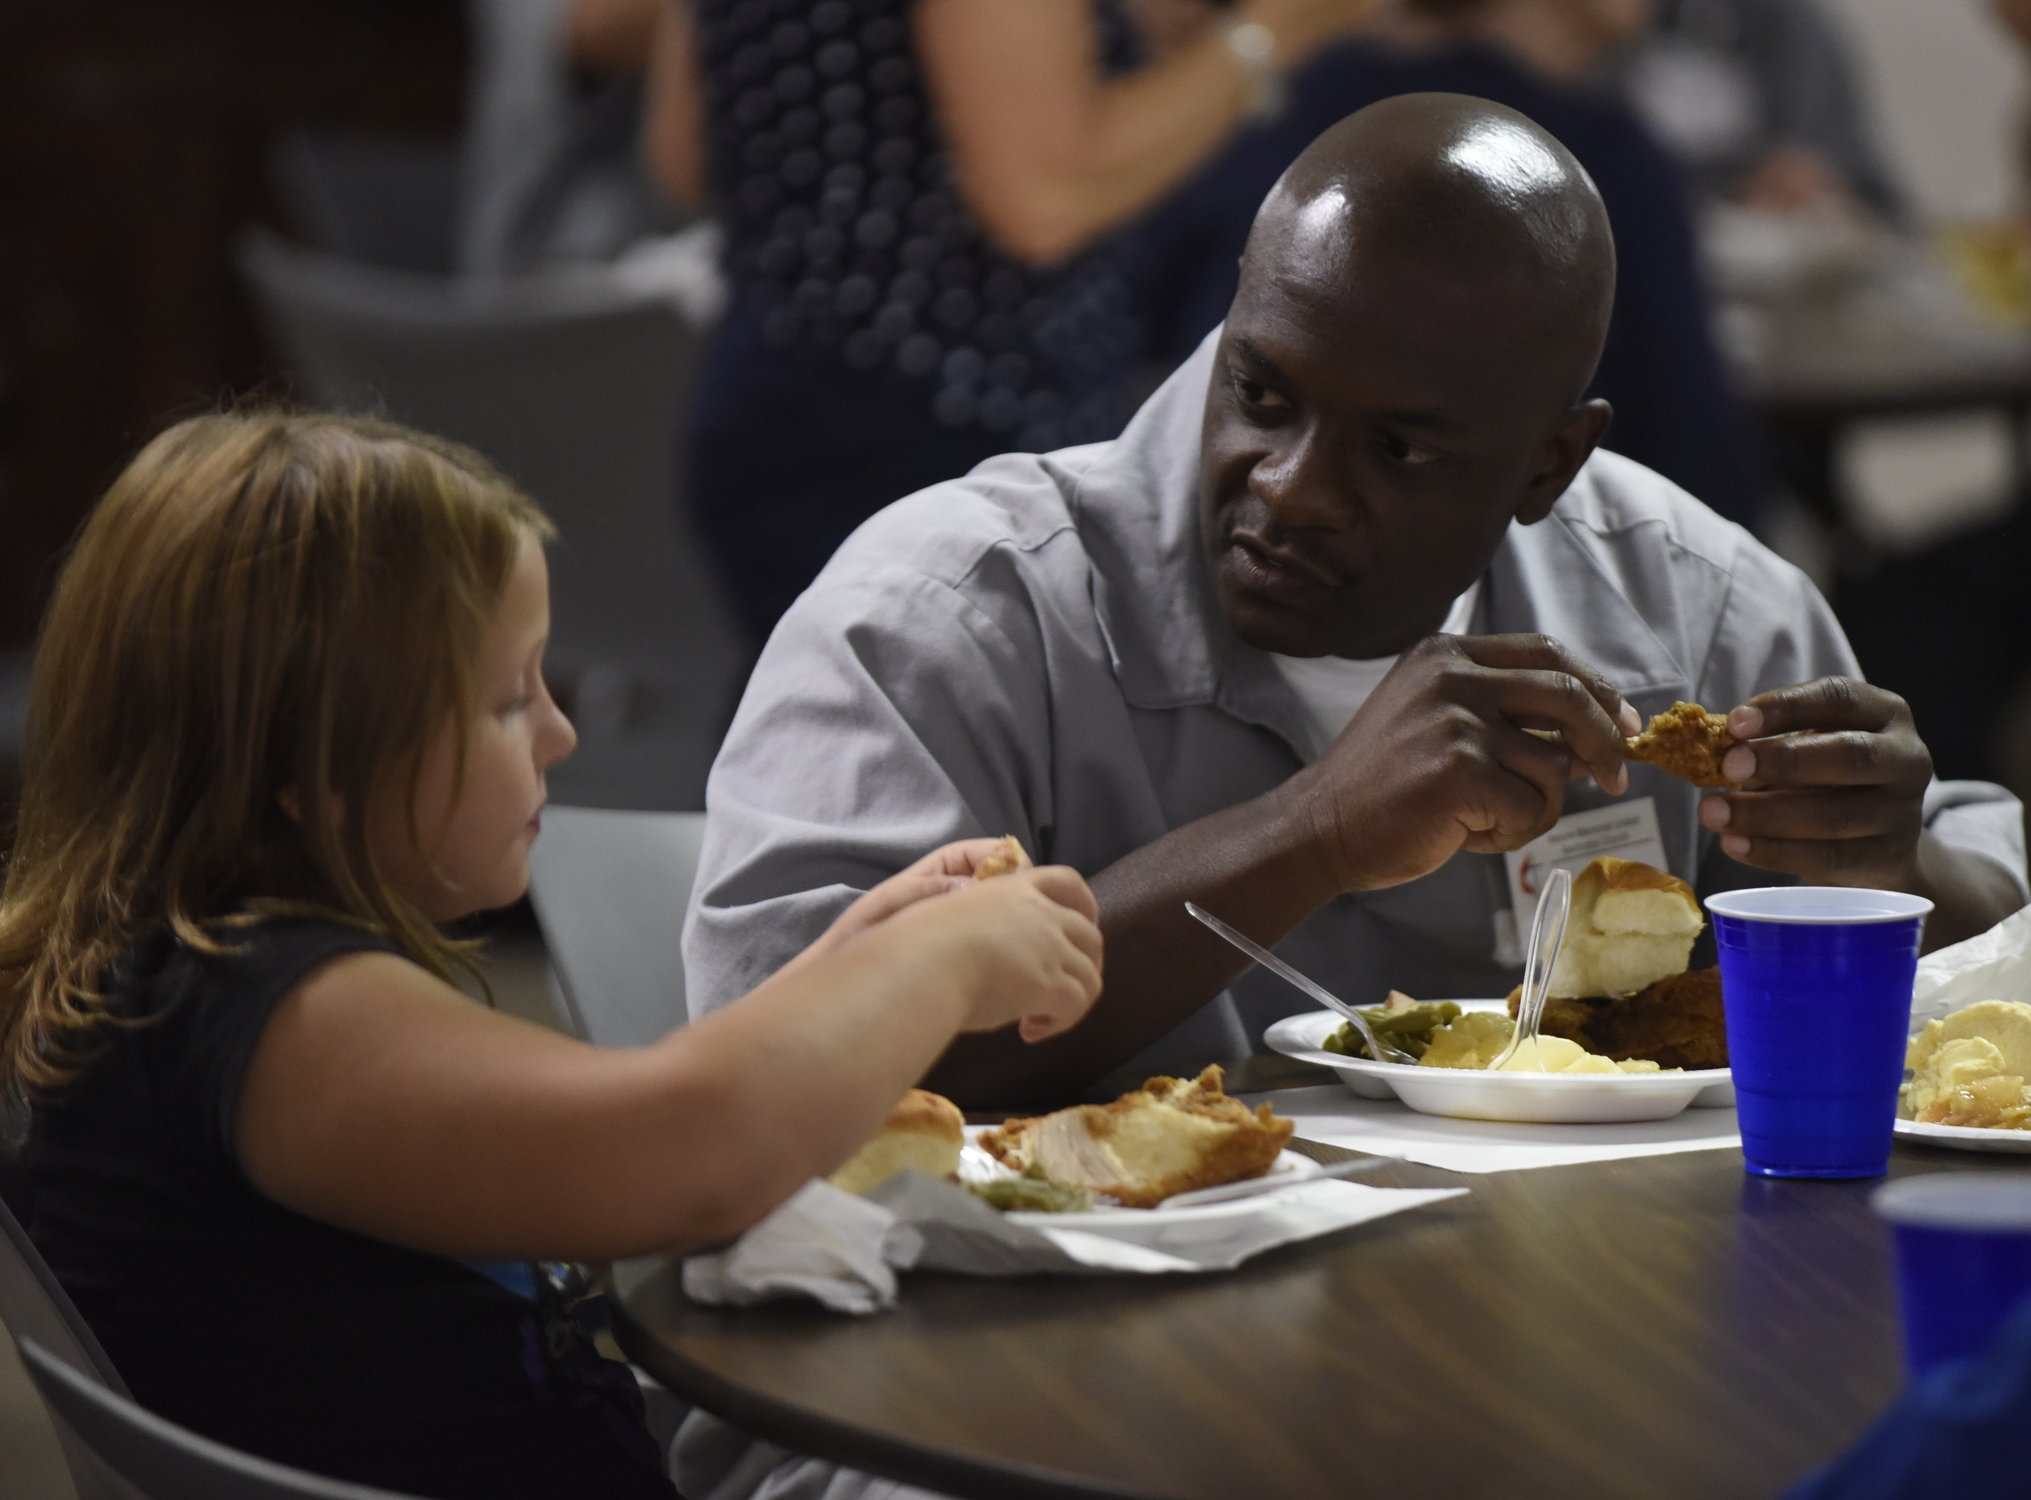  Alyson Taylor, 8, left, converses with Raymond Wilson after a service on Sunday at the Nelson Memorial United Methodist Church. Wilson, an inmate at the Boonville Correctional Center, participated in a weeklong service project that concluded after t